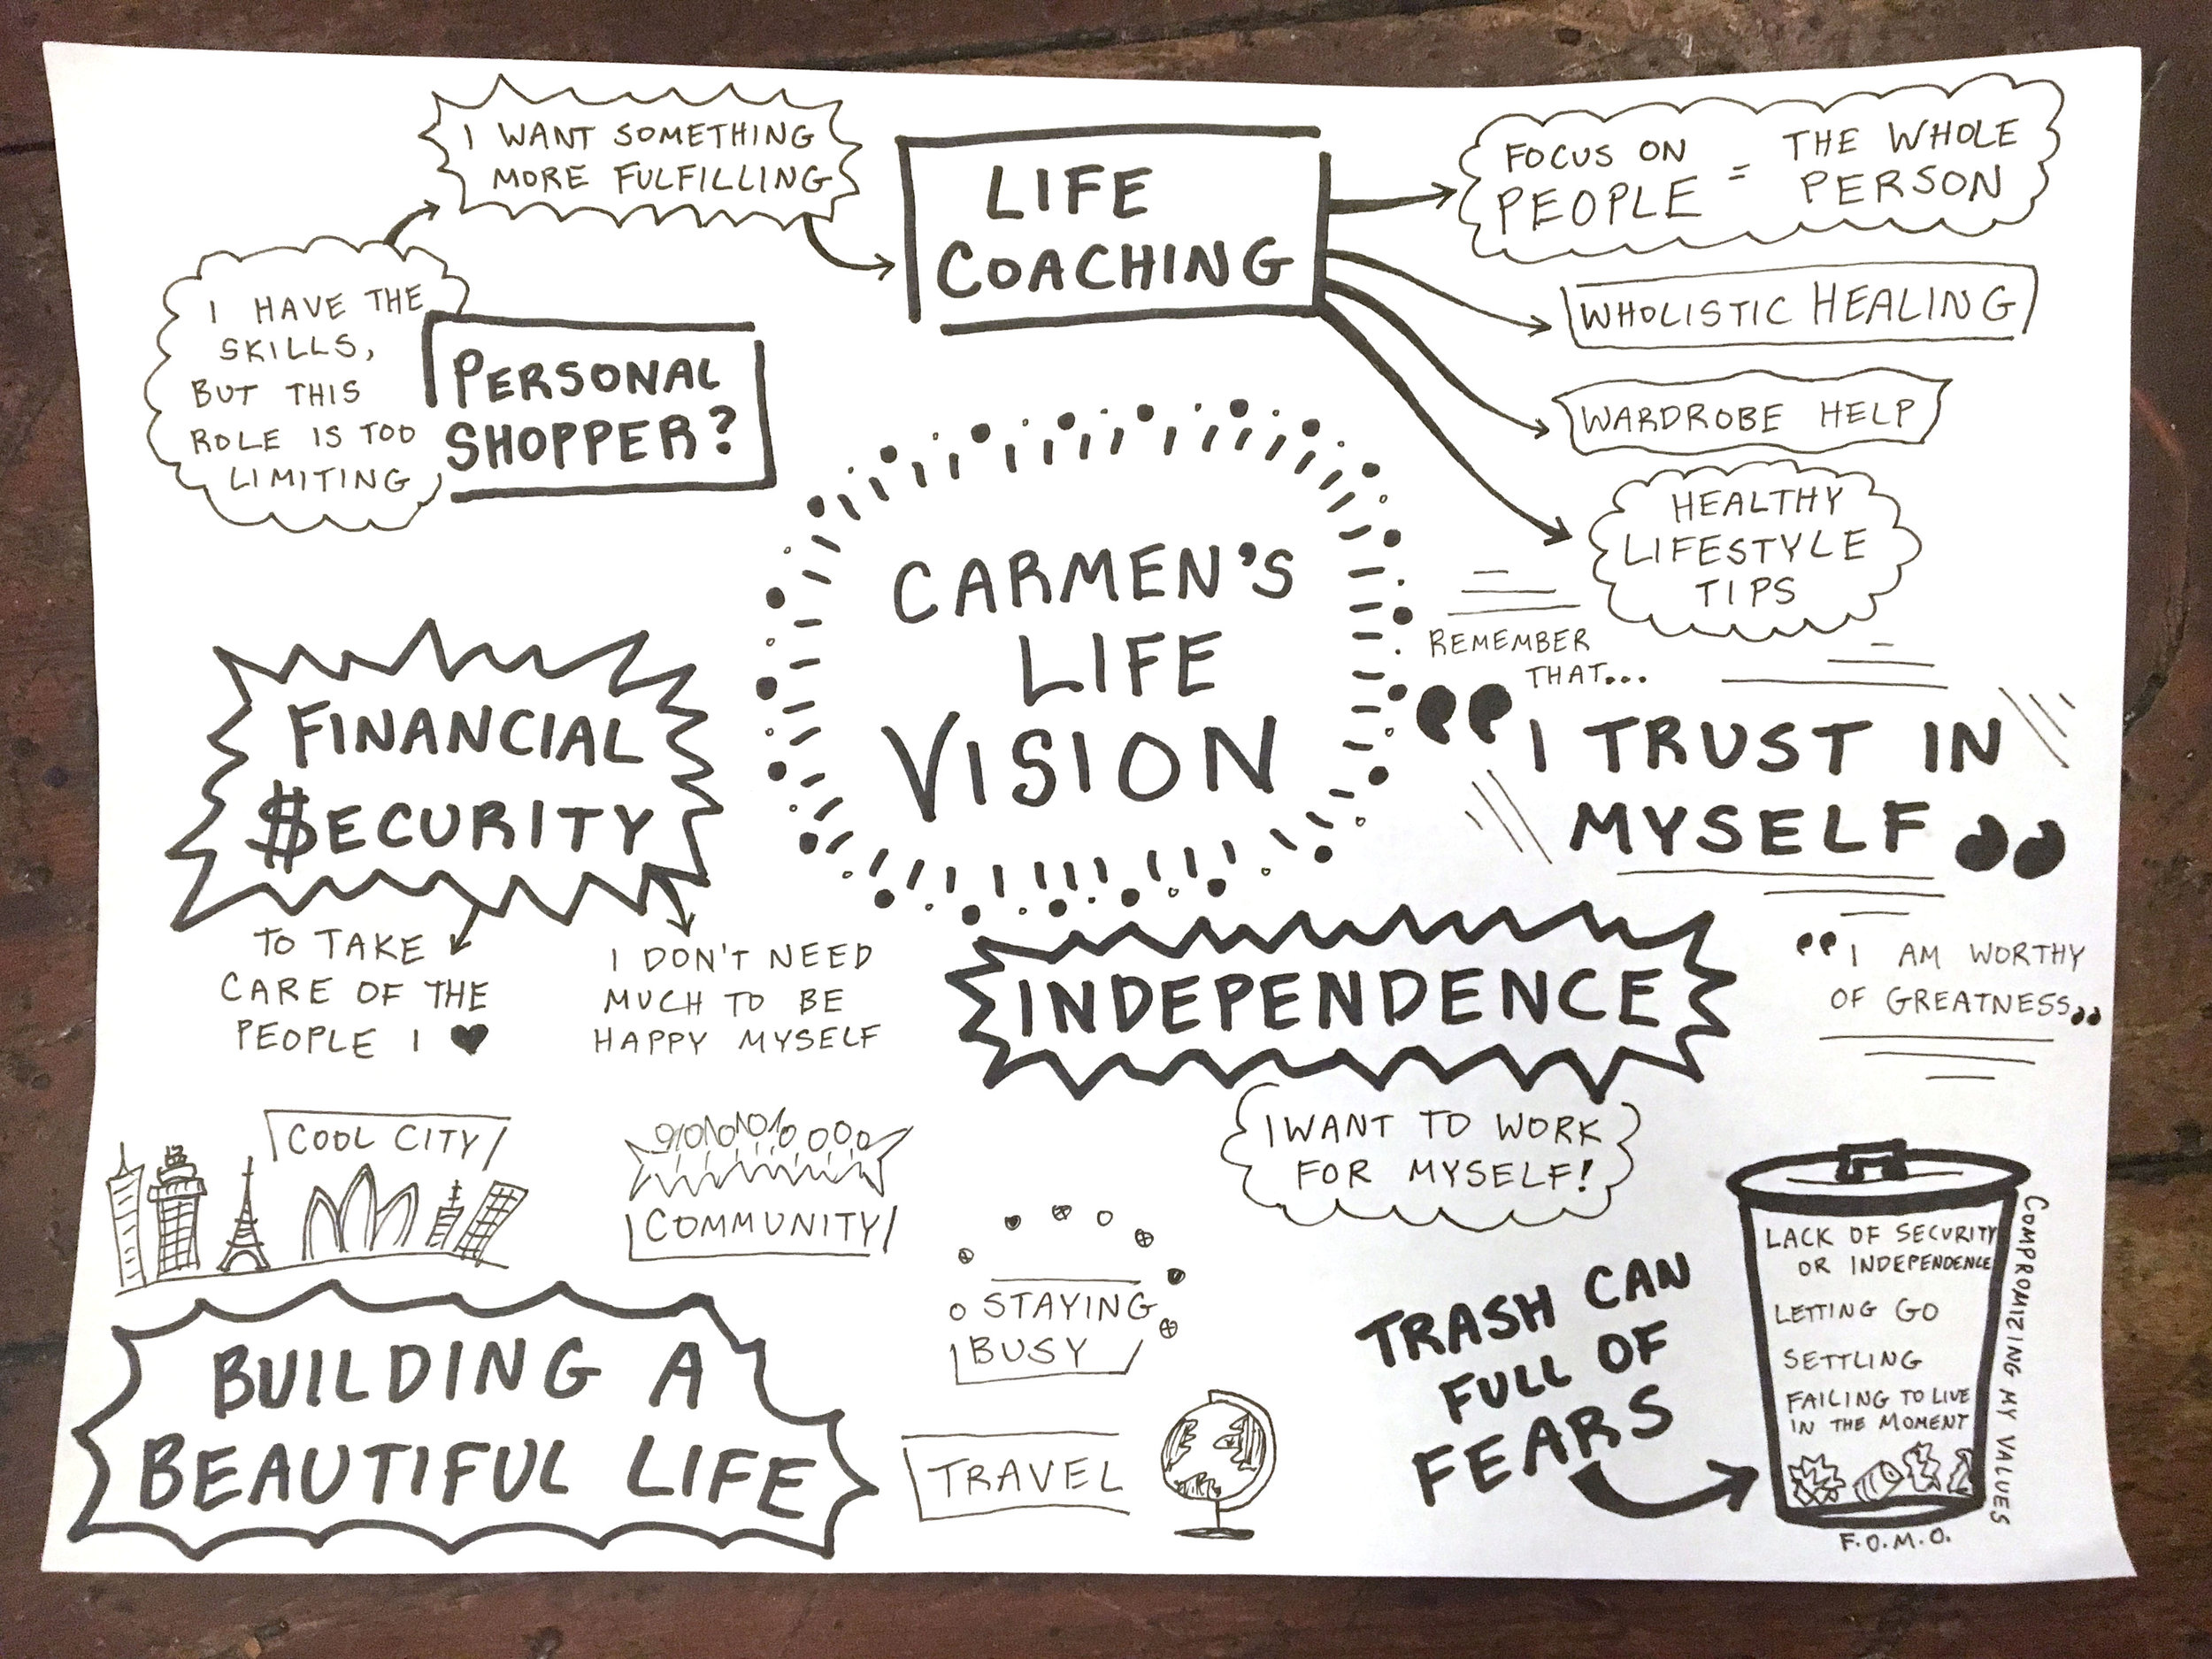 Life Visioning Session - Articulating and connecting passions and goals